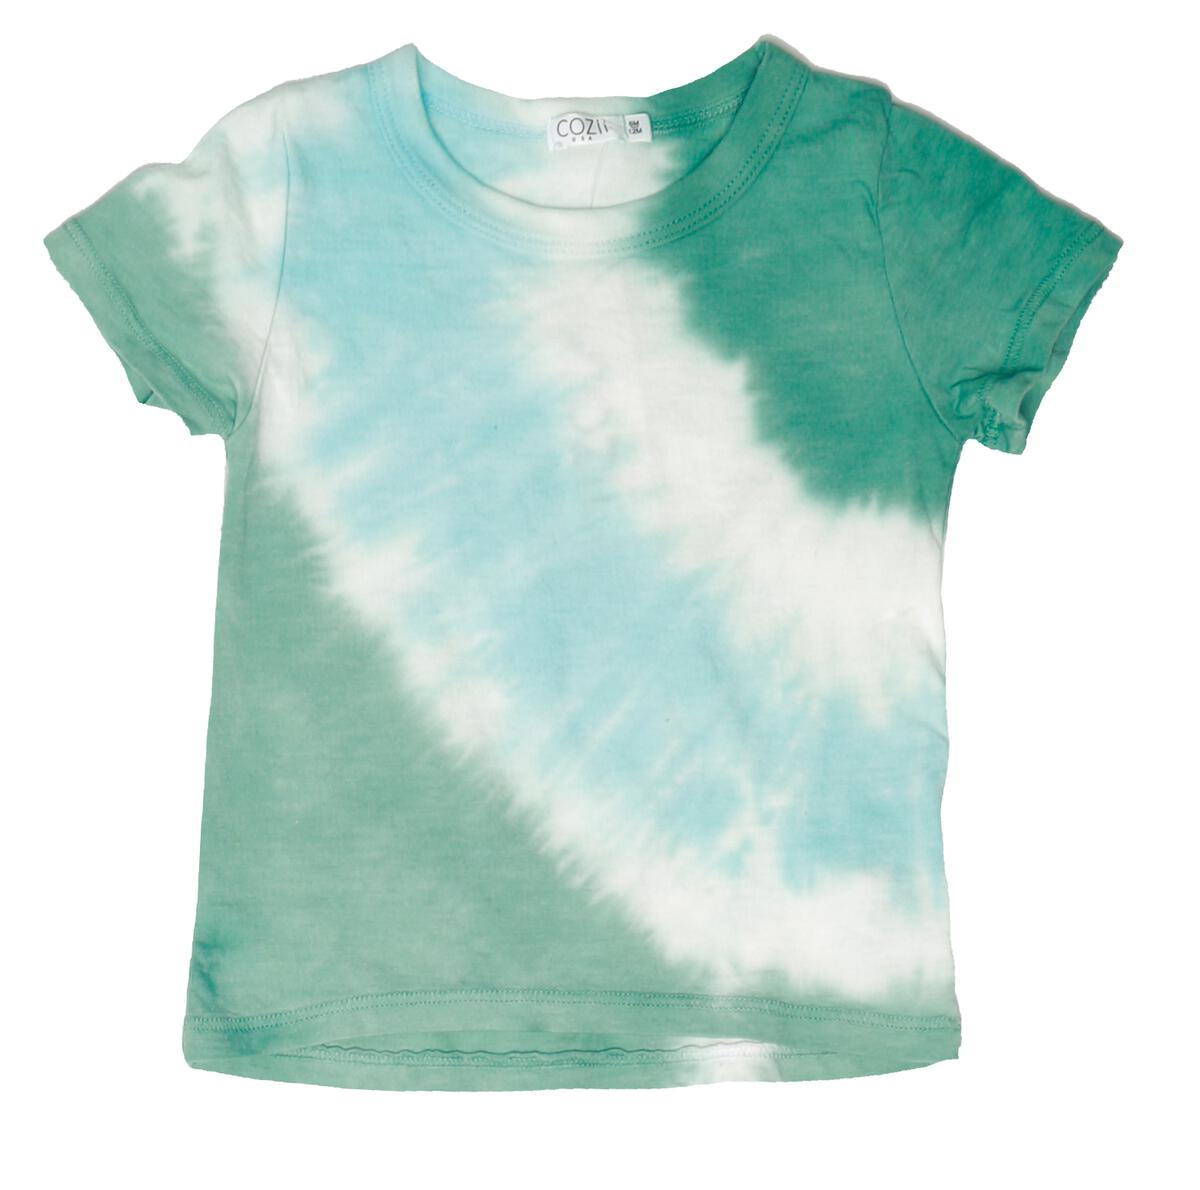 COZII S/S TEE AND HARUM SHORTS SET - CLOSER/BLUE TIE DYE